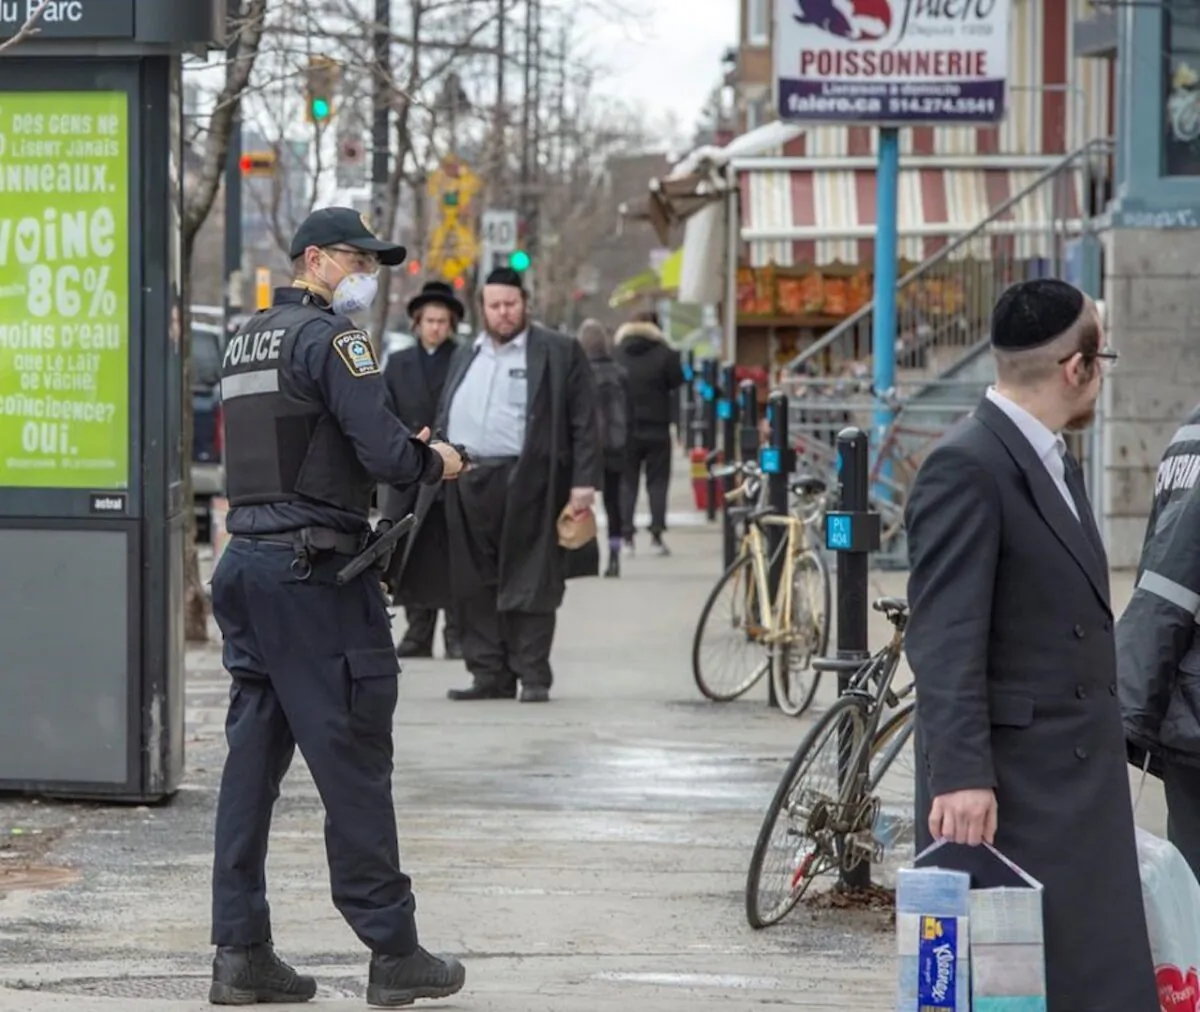 Police keep an eye on social distancing in Montreal, Canada, on April 3, 2020. (Ryan Remiorz/The Canadian Press)